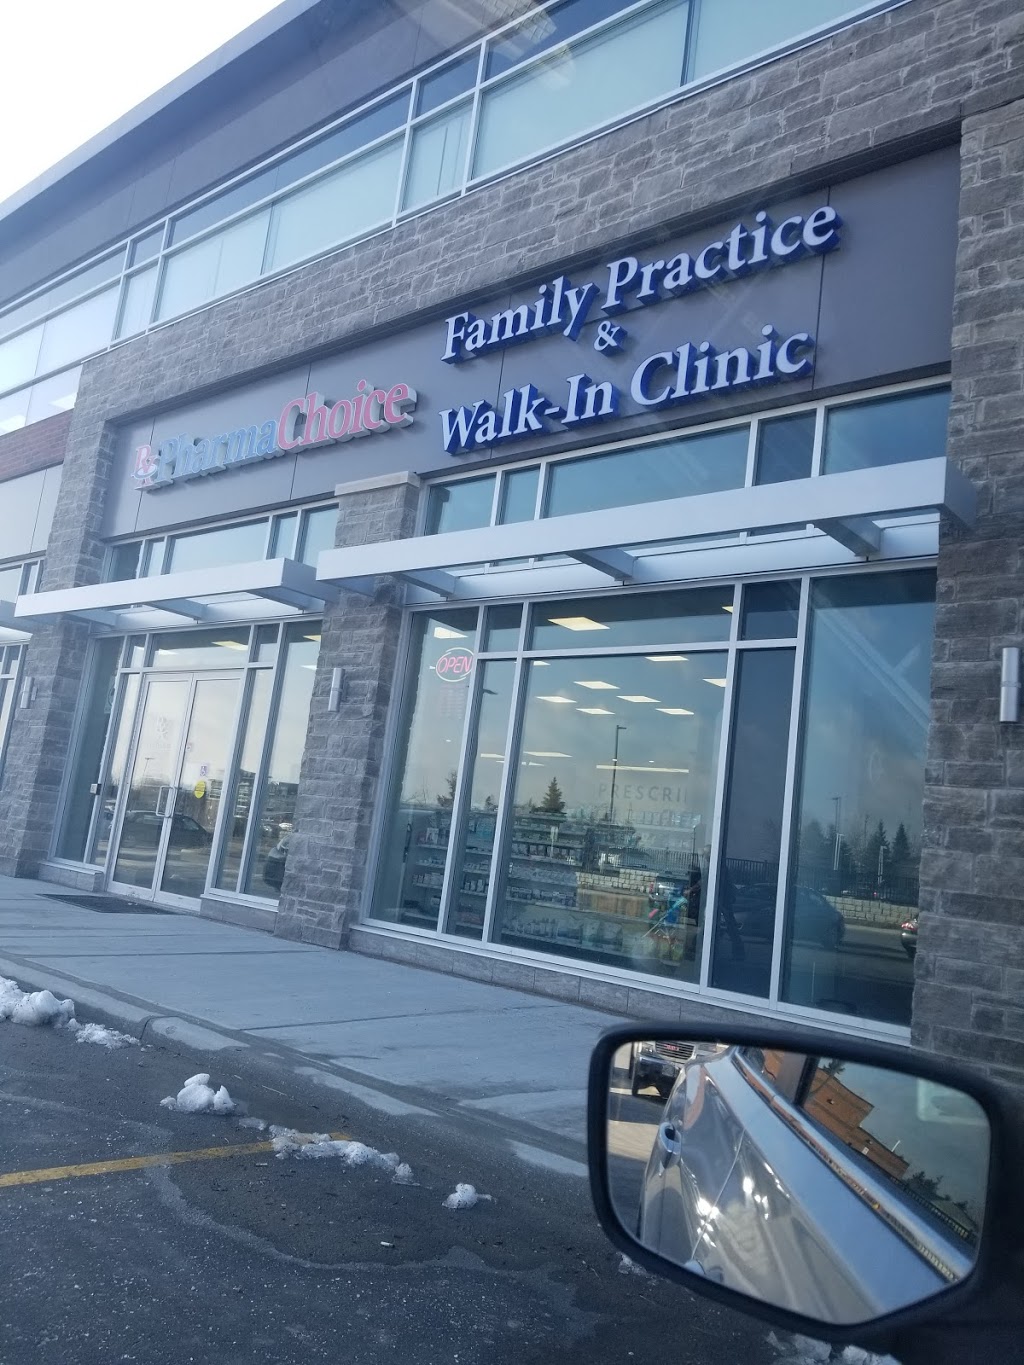 Ajax Family Practice & Walk-In Clinic | doctor | 901 Harwood Ave N Unit 101, Ajax, ON L1Z 0T4, Canada | 9056864444 OR +1 905-686-4444